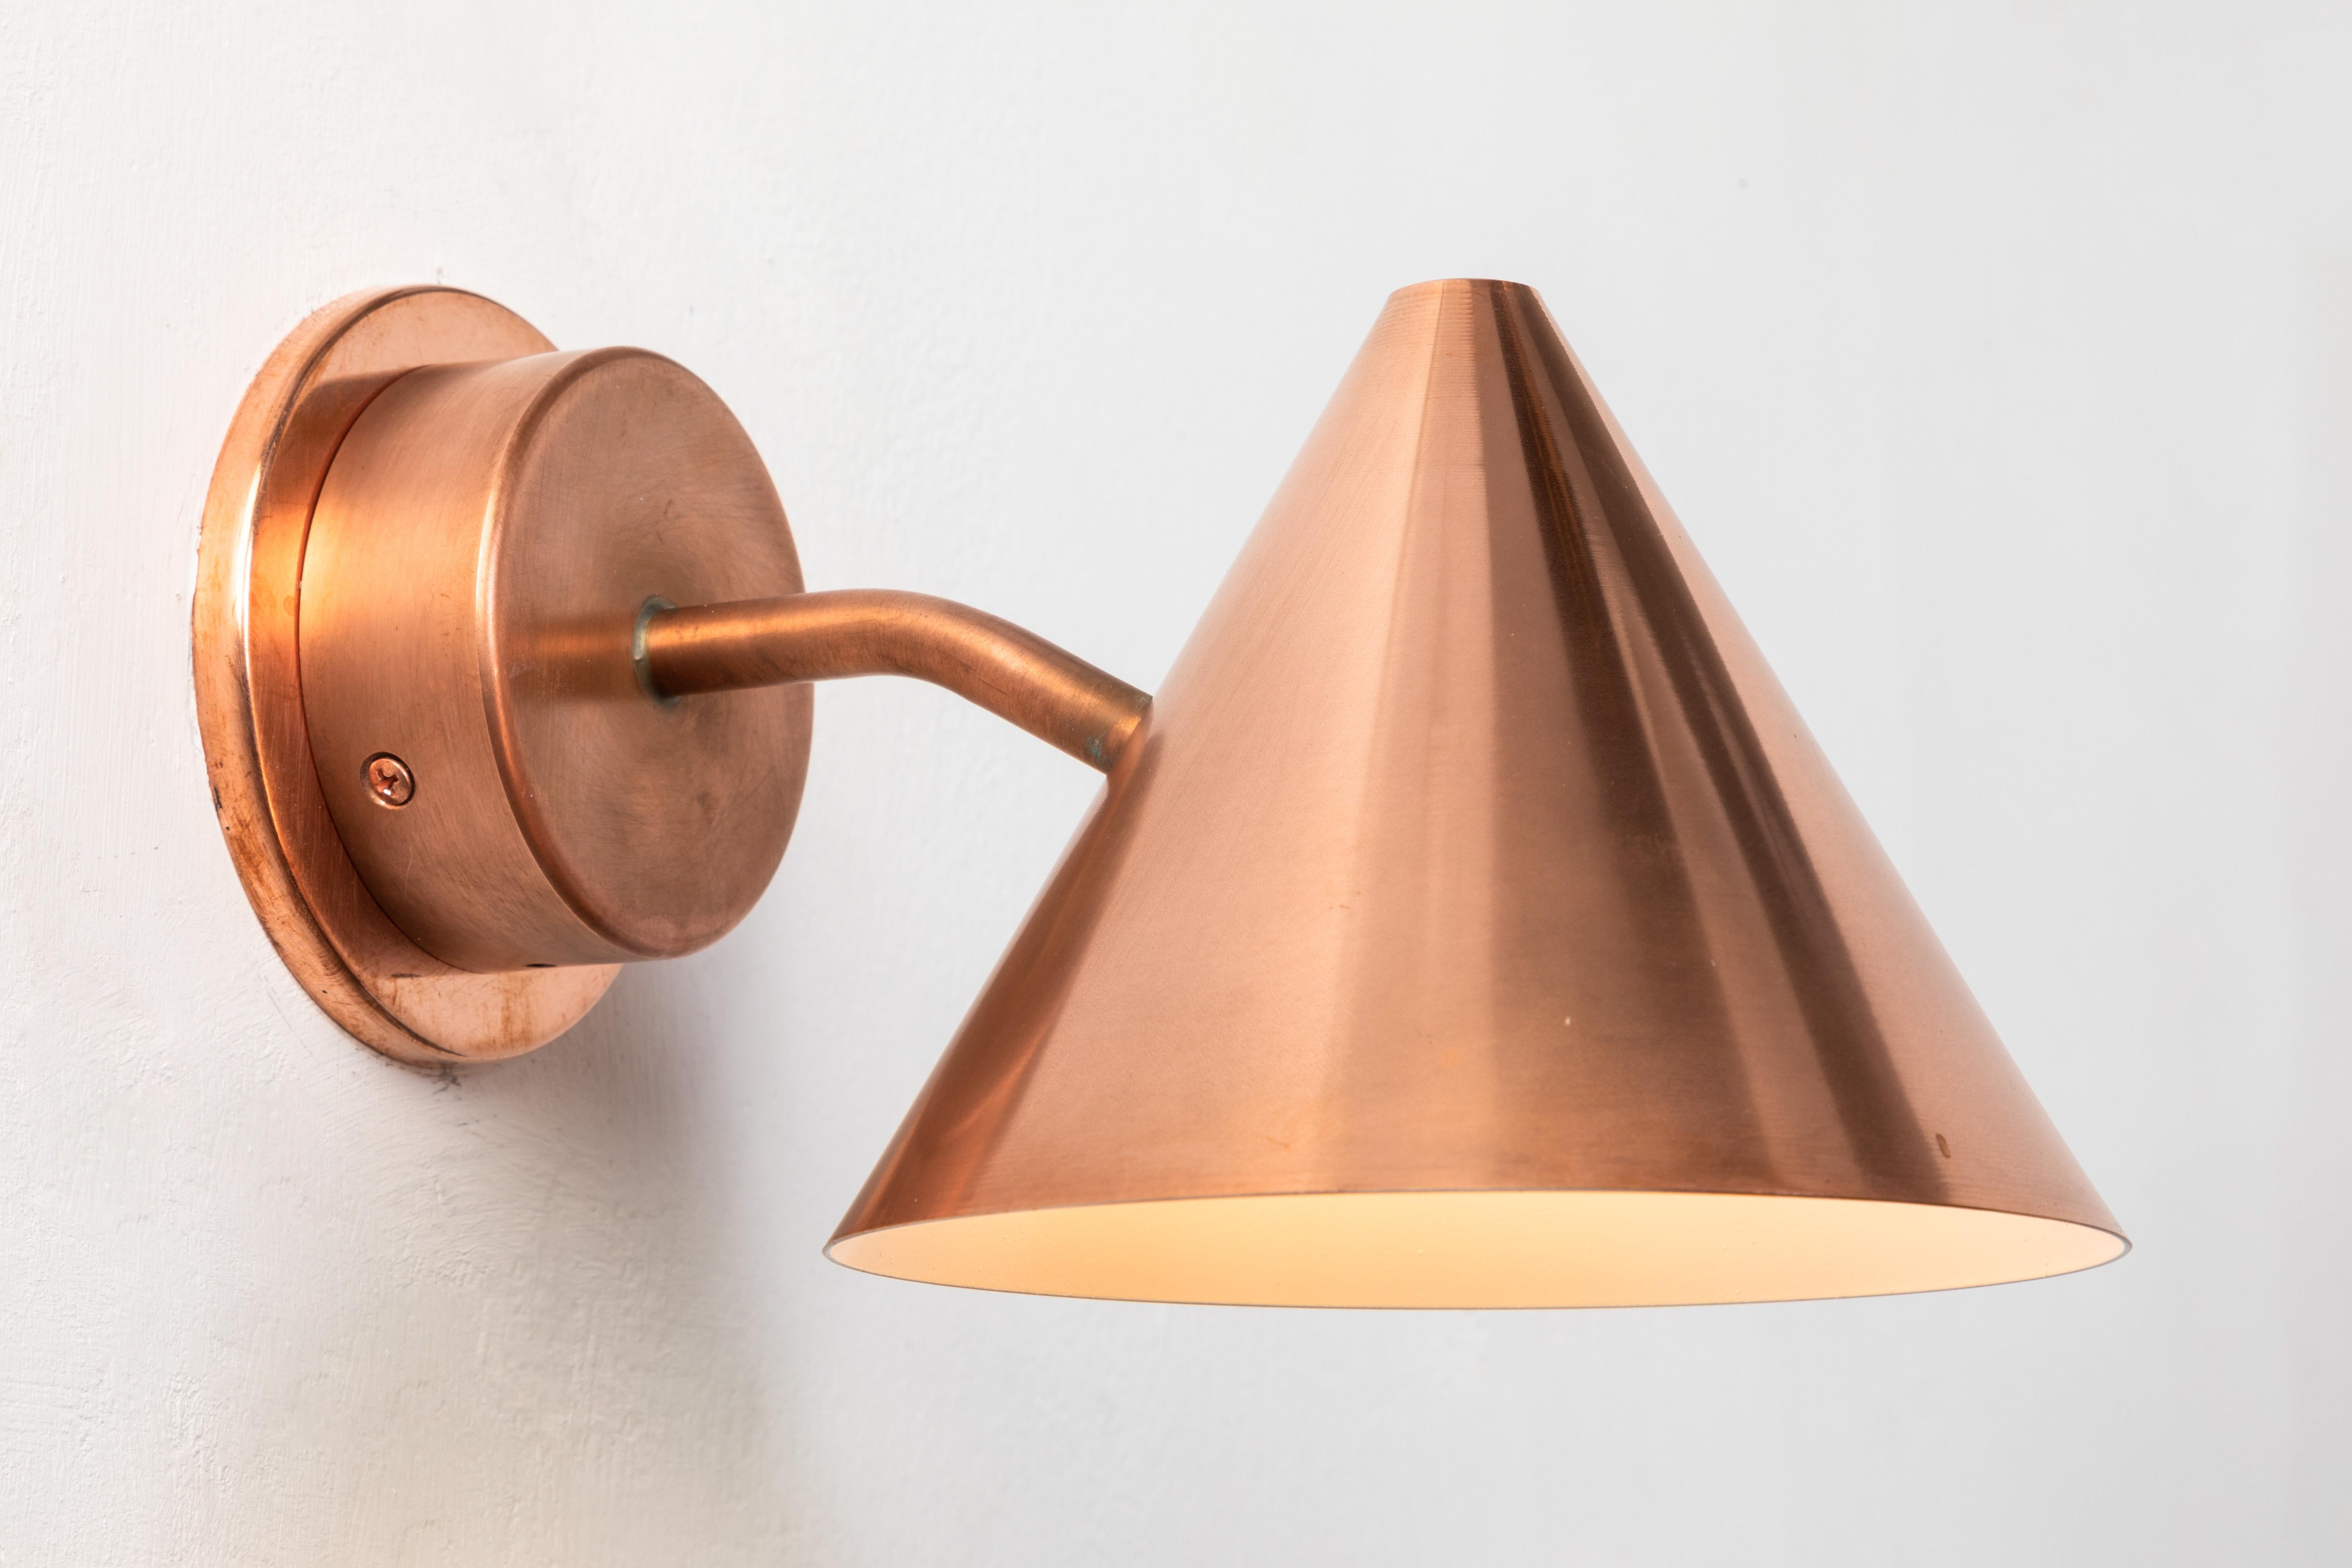 Hans-Agne Jakobsson 'Mini-Tratten' raw copper outdoor sconce. An exclusive made for U.S. and UL listed authorized re-edition of the classic Swedish design executed in raw copper with white painted interior. An incredibly refined design that is